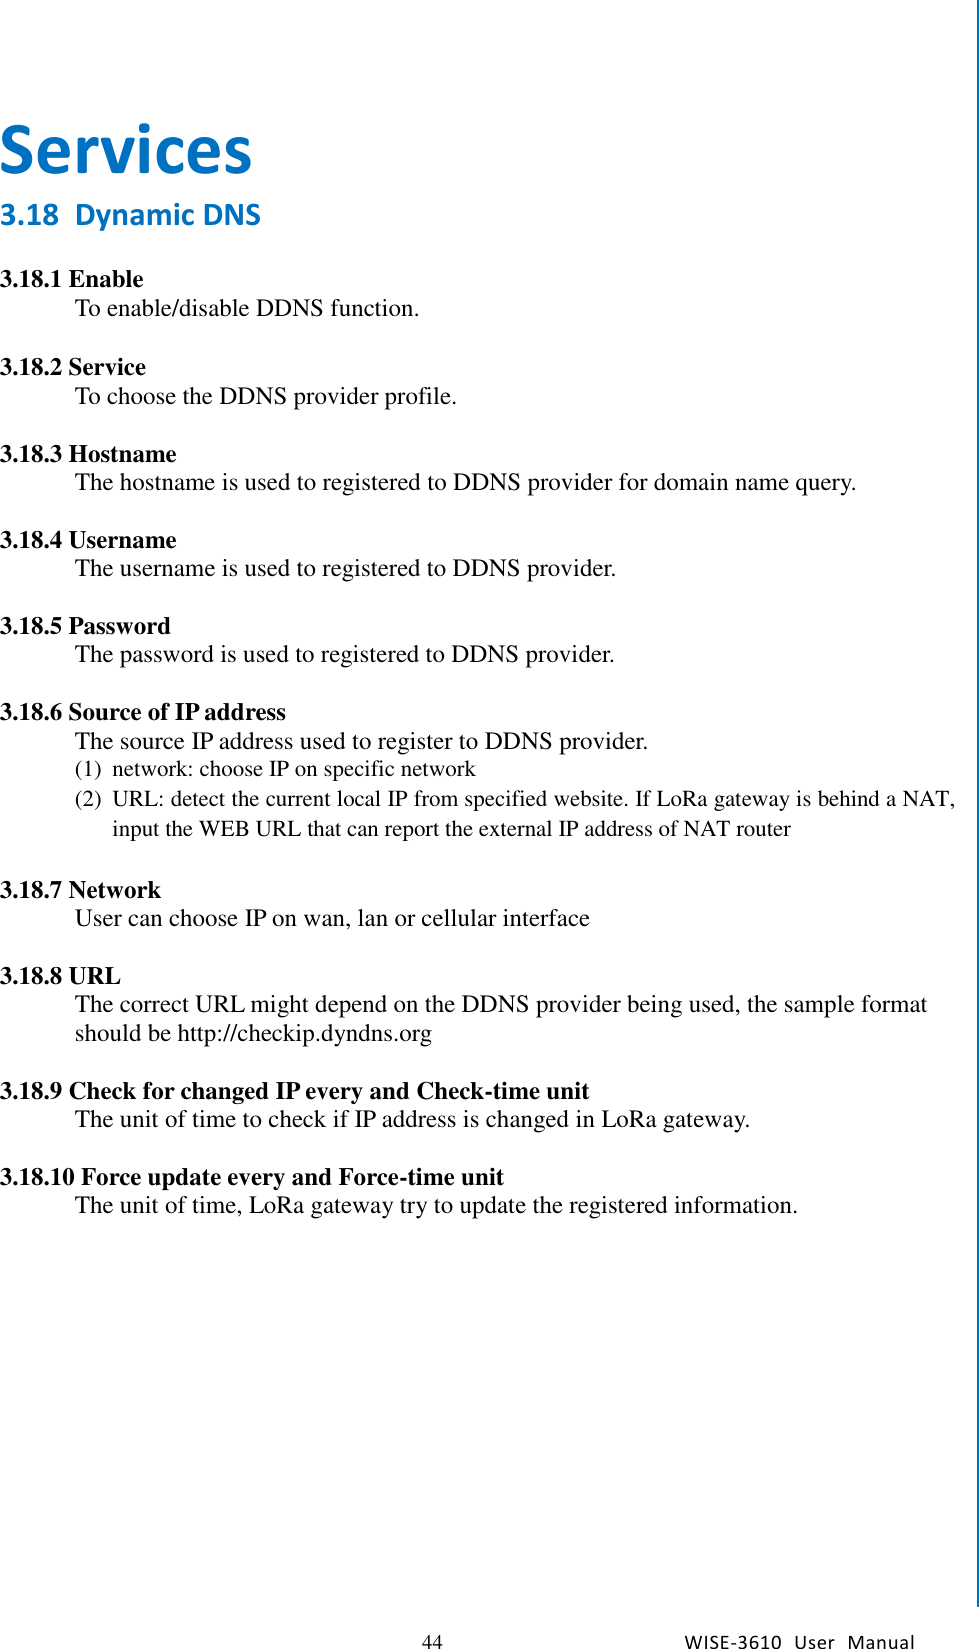   44 WISE-3610  User  Manual  Chapter5    Advantech Services Services 3.18 Dynamic DNS  3.18.1 Enable To enable/disable DDNS function.    3.18.2 Service To choose the DDNS provider profile.    3.18.3 Hostname The hostname is used to registered to DDNS provider for domain name query.    3.18.4 Username The username is used to registered to DDNS provider.    3.18.5 Password The password is used to registered to DDNS provider.  3.18.6 Source of IP address The source IP address used to register to DDNS provider. (1) network: choose IP on specific network (2) URL: detect the current local IP from specified website. If LoRa gateway is behind a NAT, input the WEB URL that can report the external IP address of NAT router  3.18.7 Network User can choose IP on wan, lan or cellular interface  3.18.8 URL The correct URL might depend on the DDNS provider being used, the sample format should be http://checkip.dyndns.org  3.18.9 Check for changed IP every and Check-time unit The unit of time to check if IP address is changed in LoRa gateway.  3.18.10 Force update every and Force-time unit The unit of time, LoRa gateway try to update the registered information.    